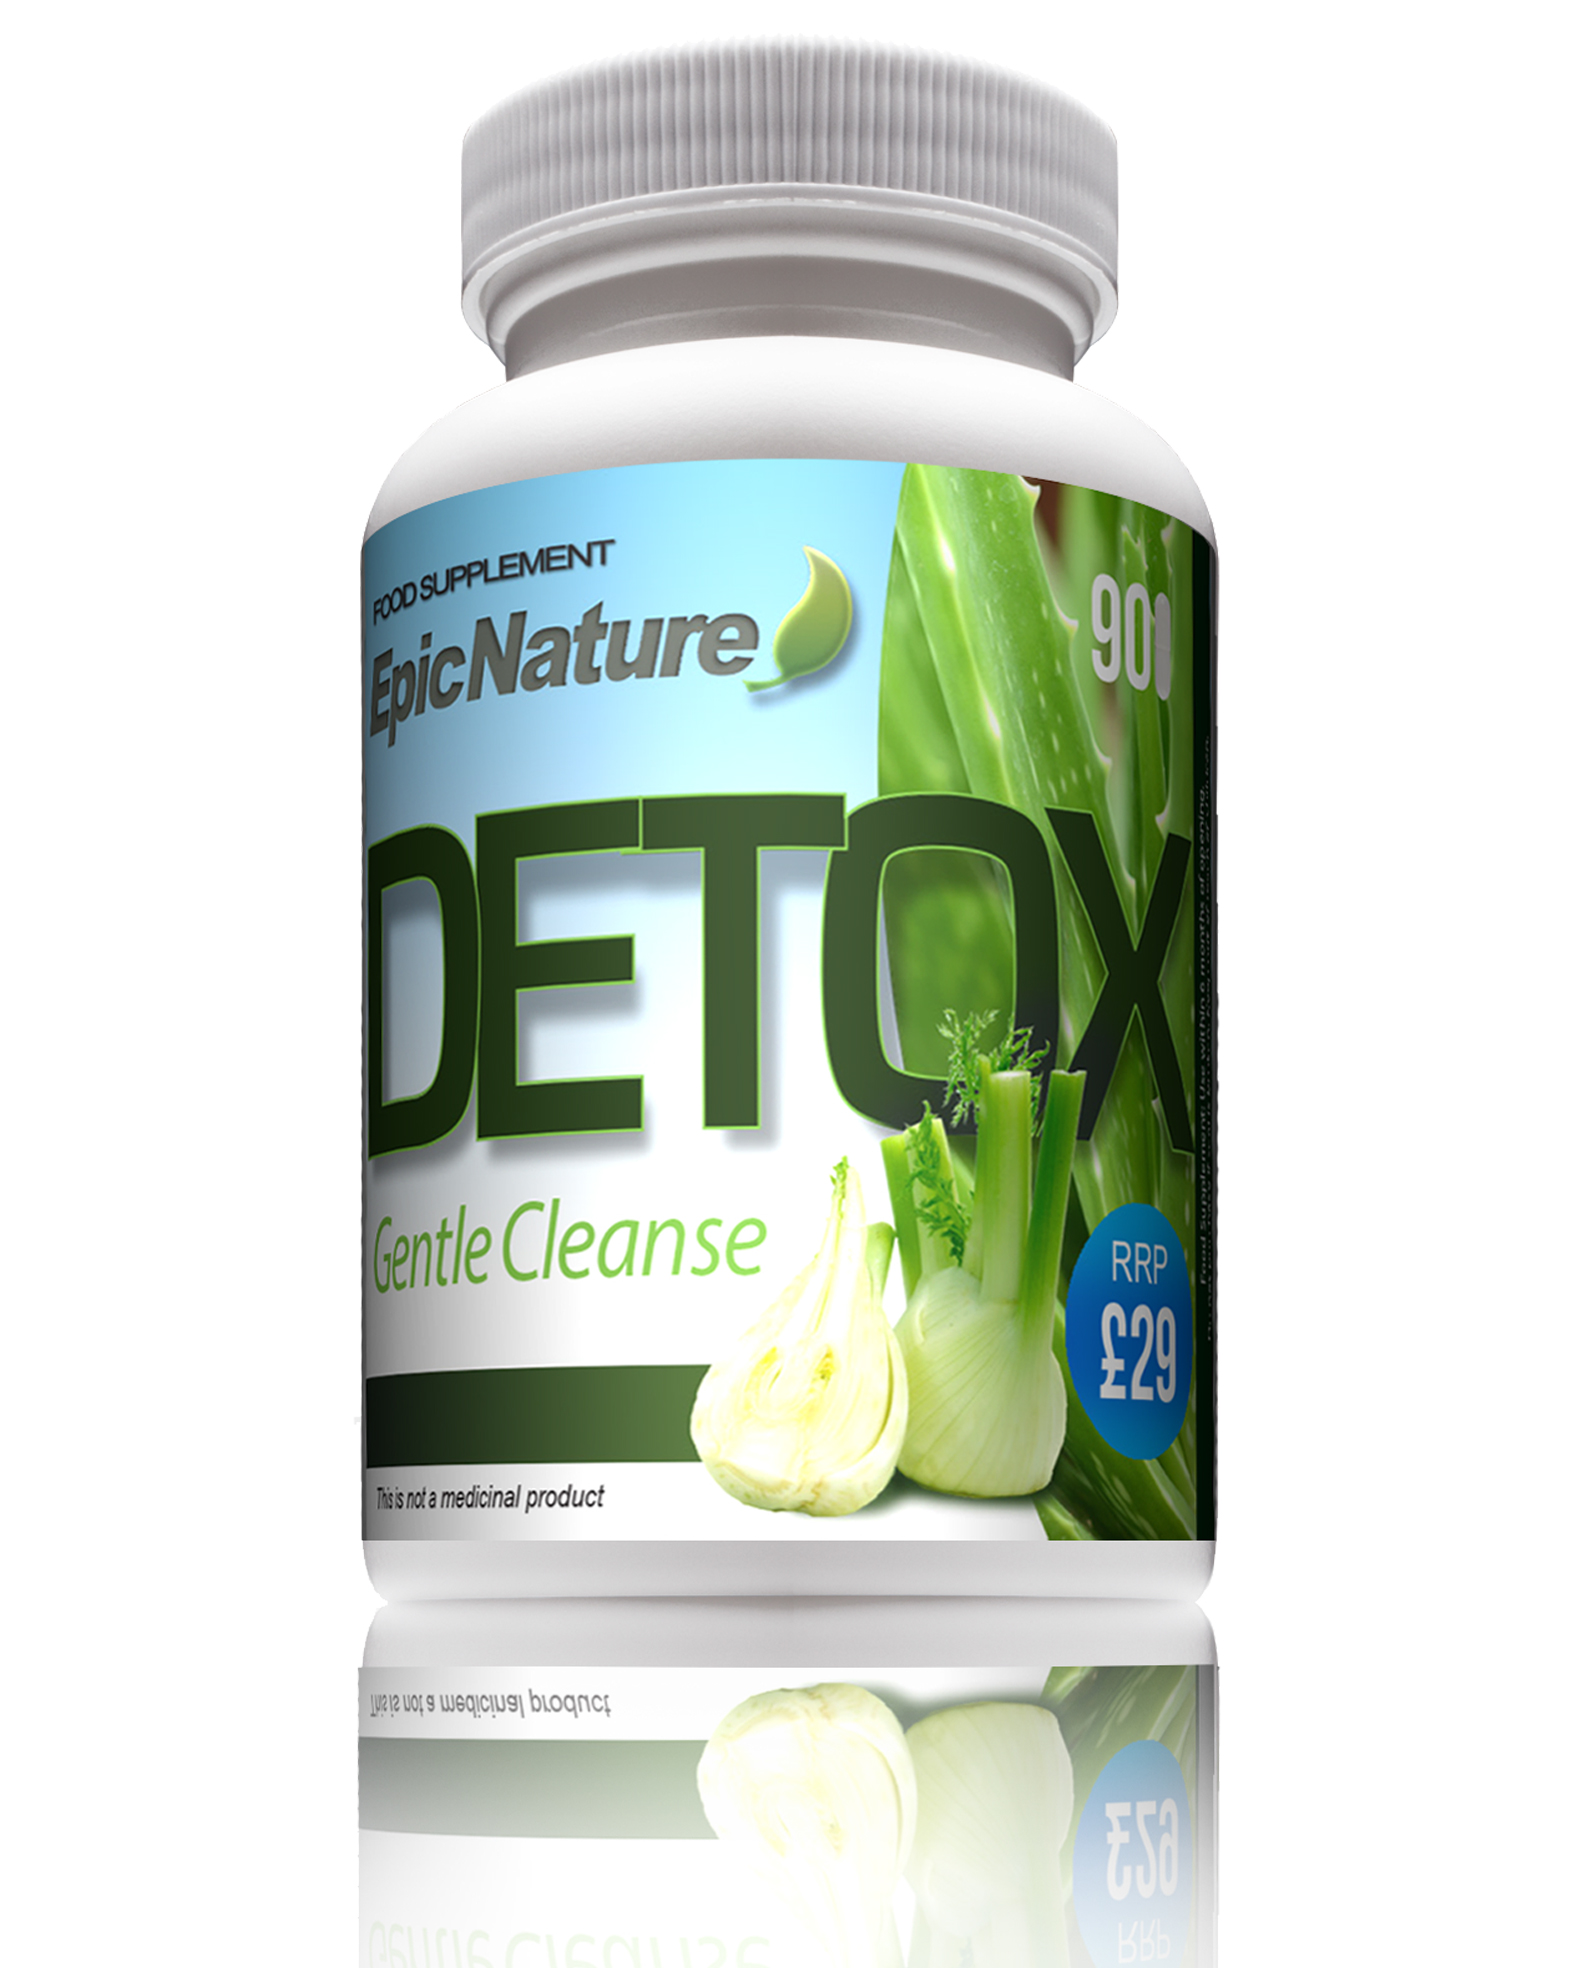 epic-nature-detox-plus-colon-cleanse-slimming-diet-weight-loss-pills